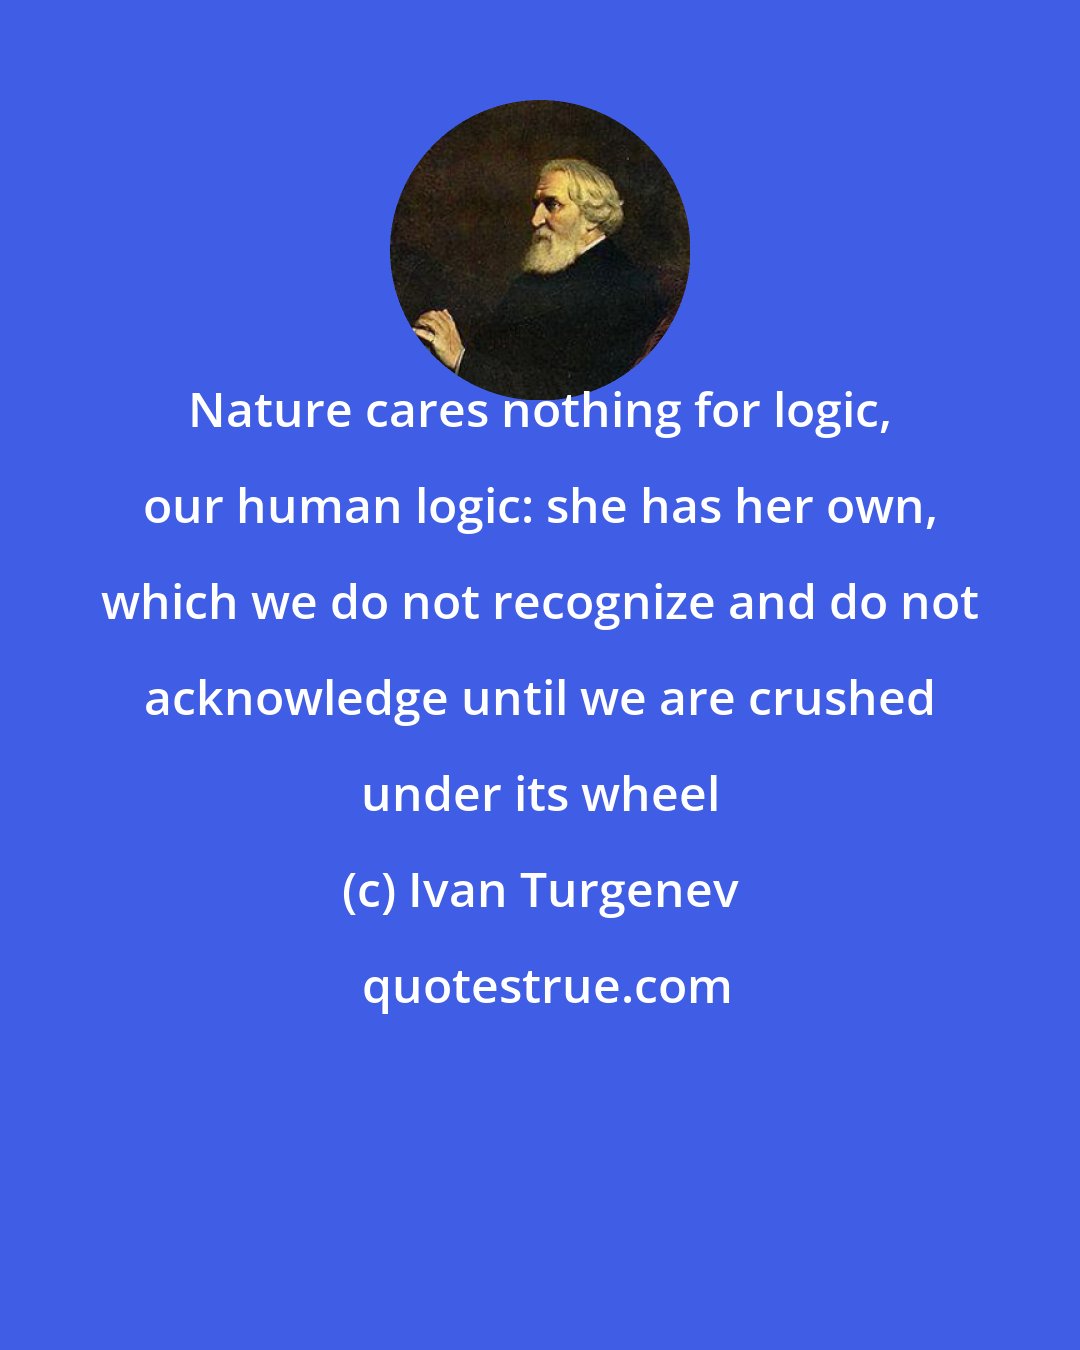 Ivan Turgenev: Nature cares nothing for logic, our human logic: she has her own, which we do not recognize and do not acknowledge until we are crushed under its wheel